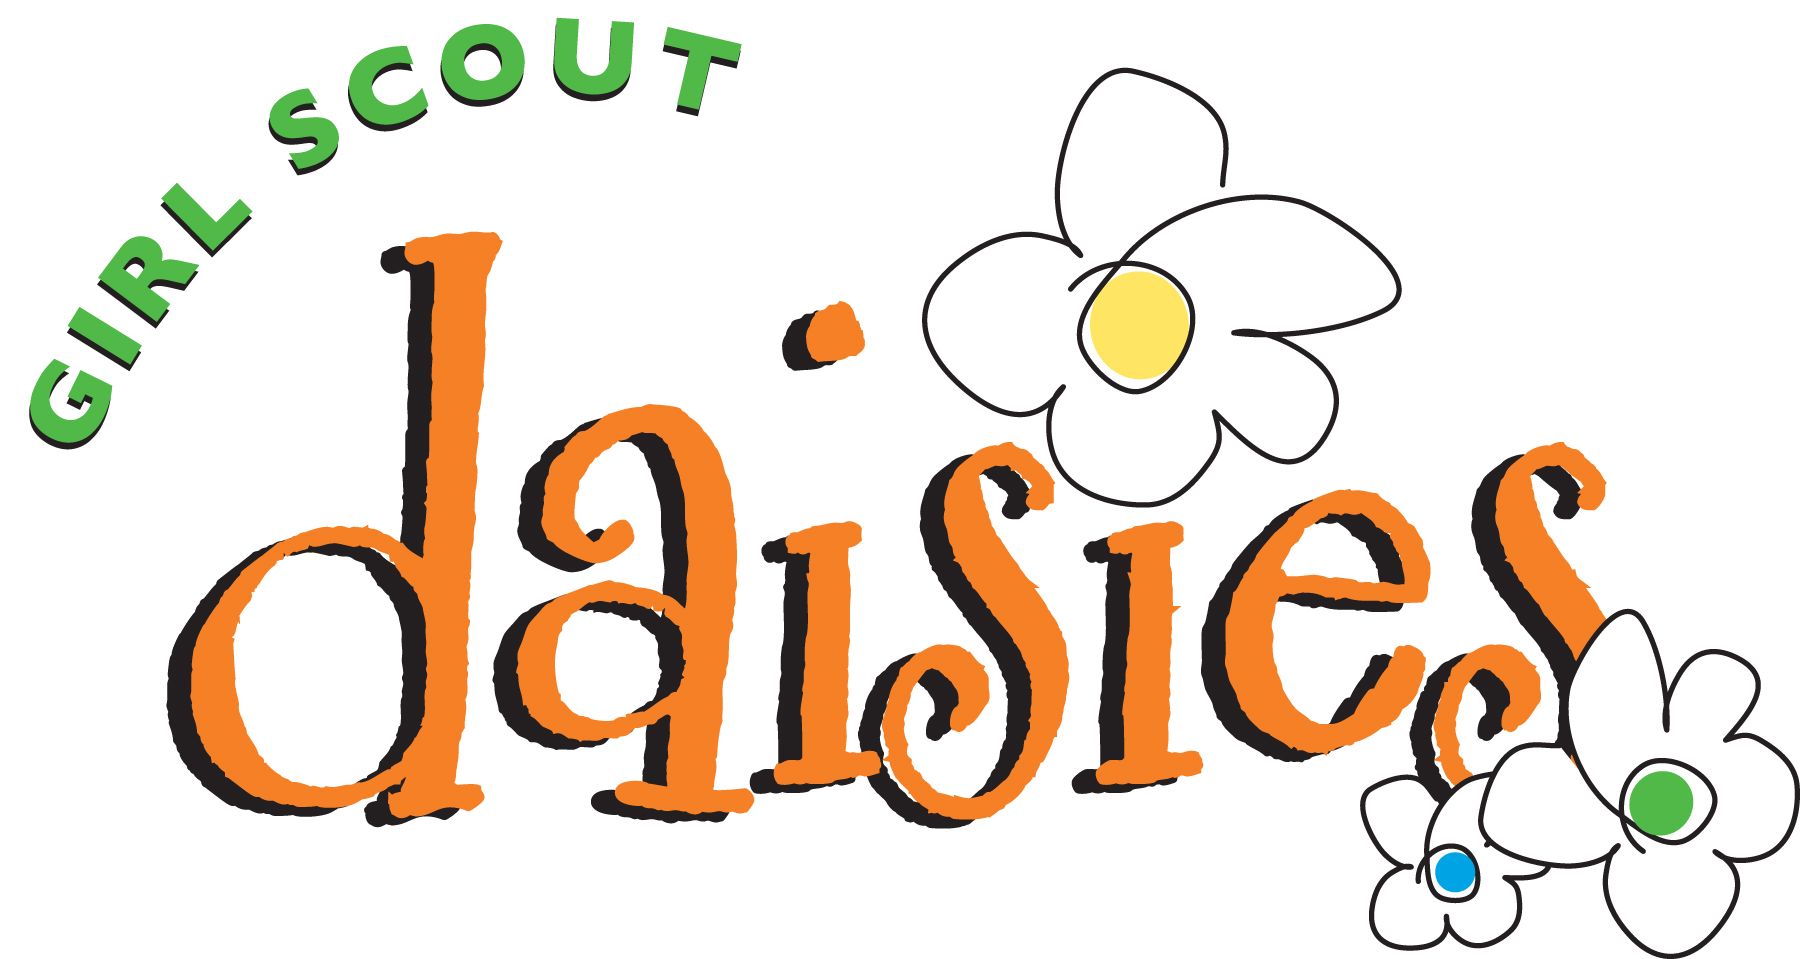 daisy clipart logo girl scout